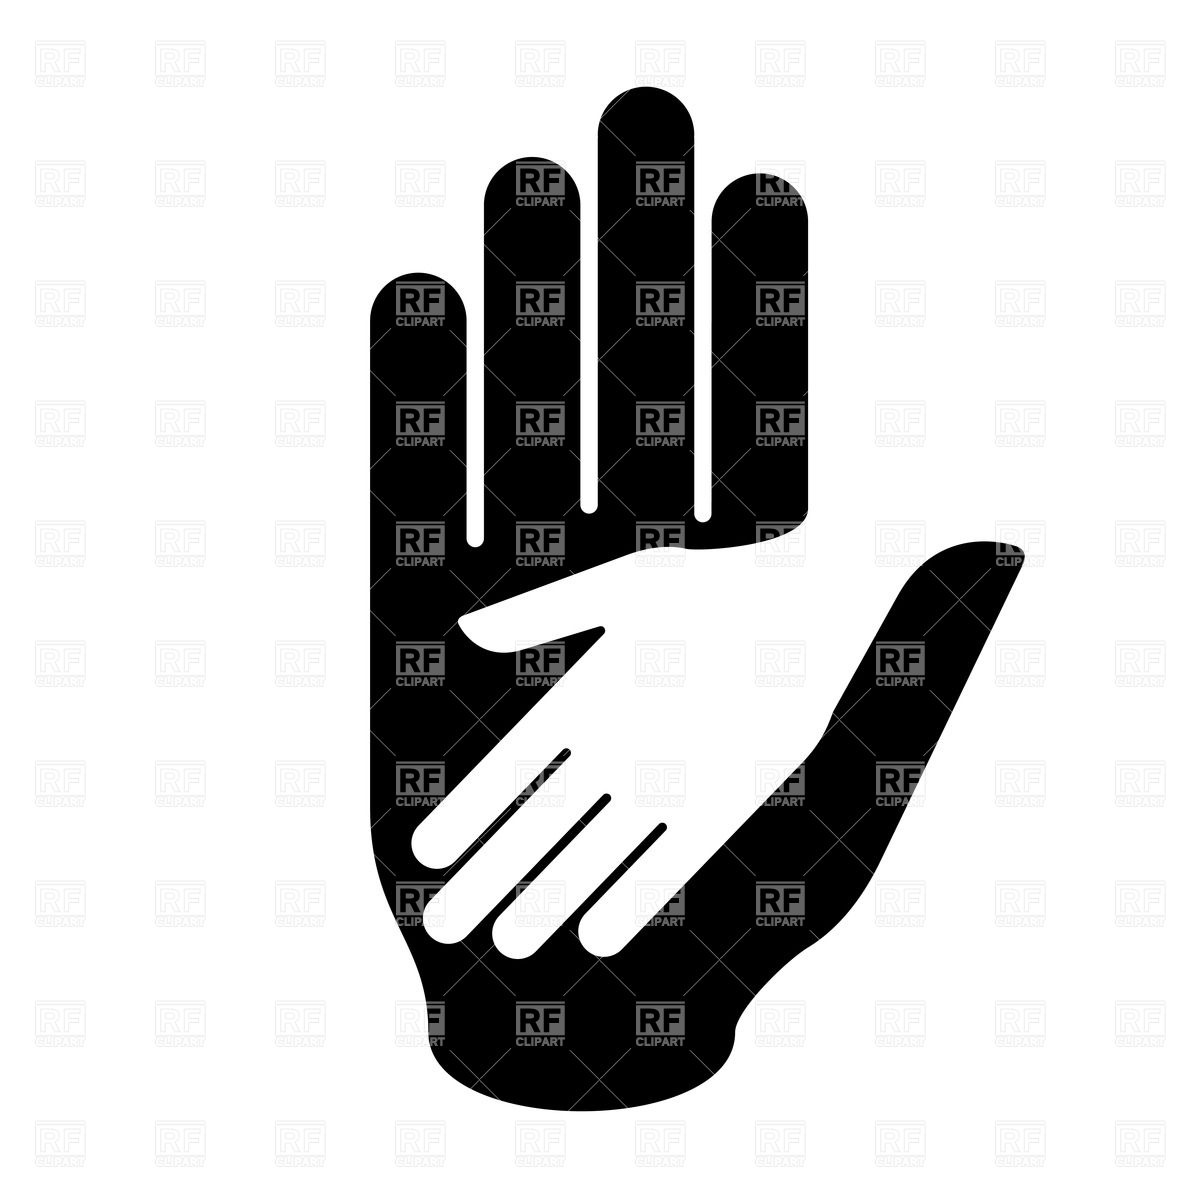  Family Clipart Black And White Black And White Image Of Hand In Hand    